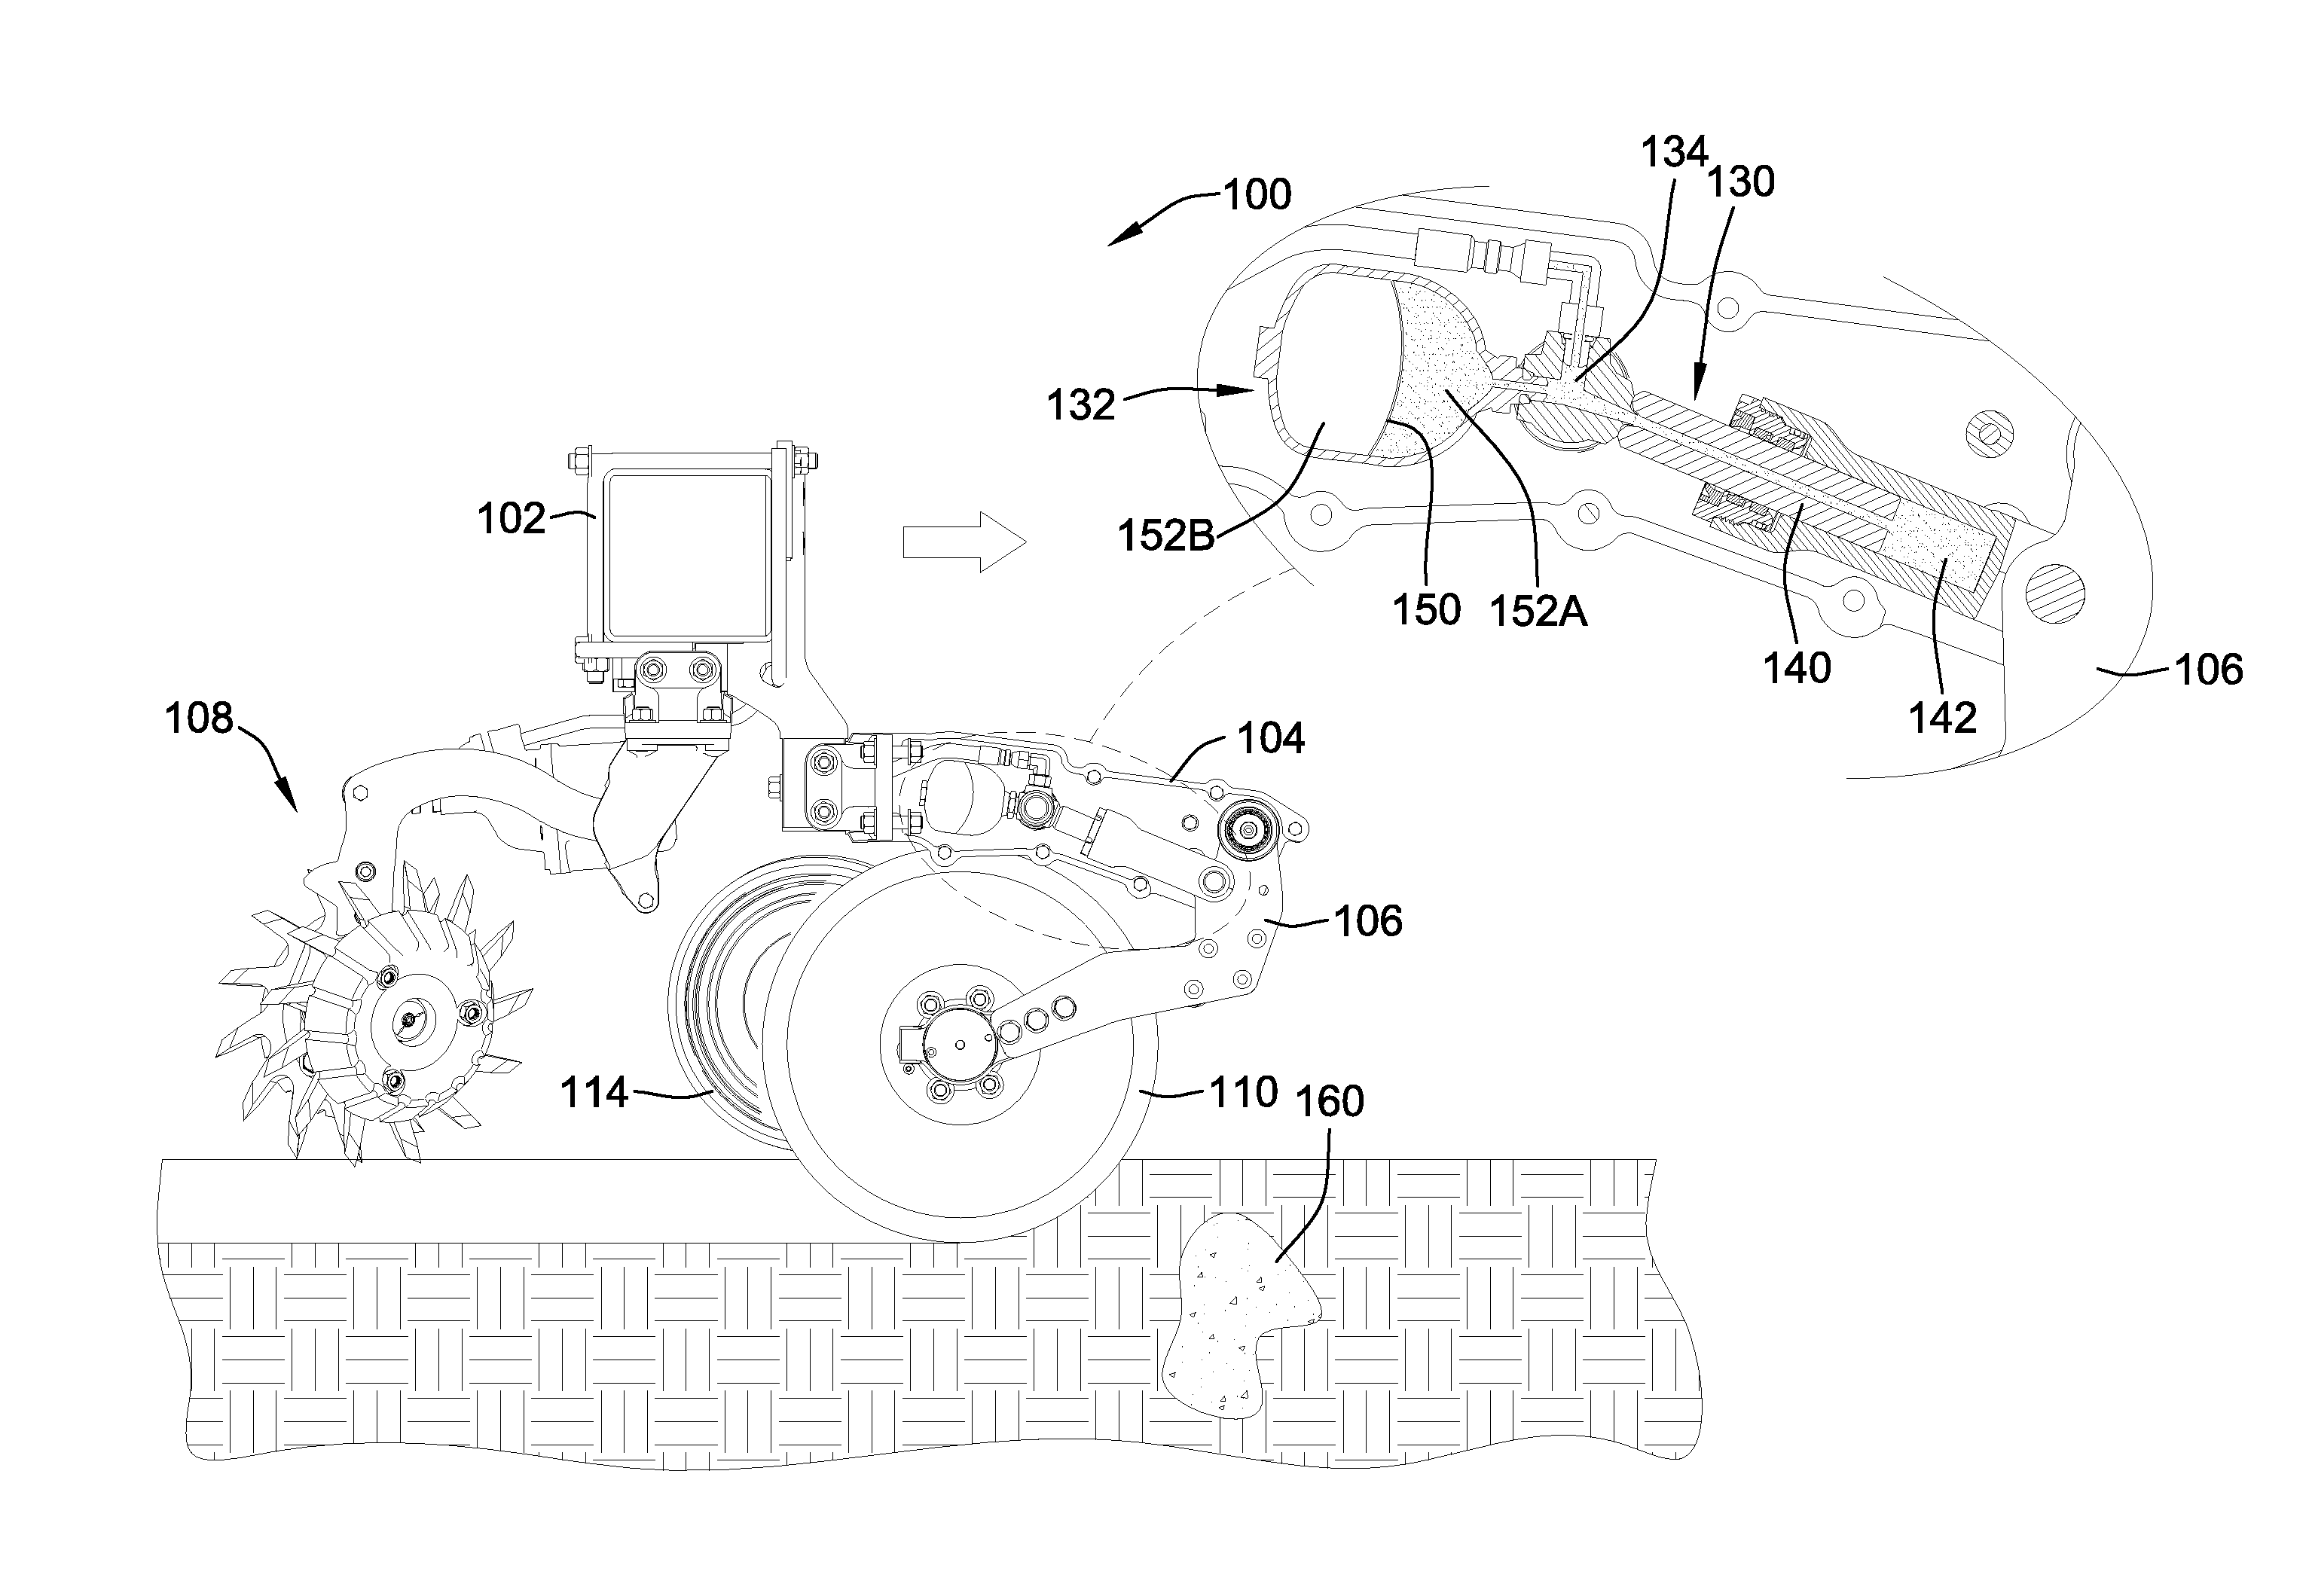 Agricultural tool with structural housing for hydraulic actuator